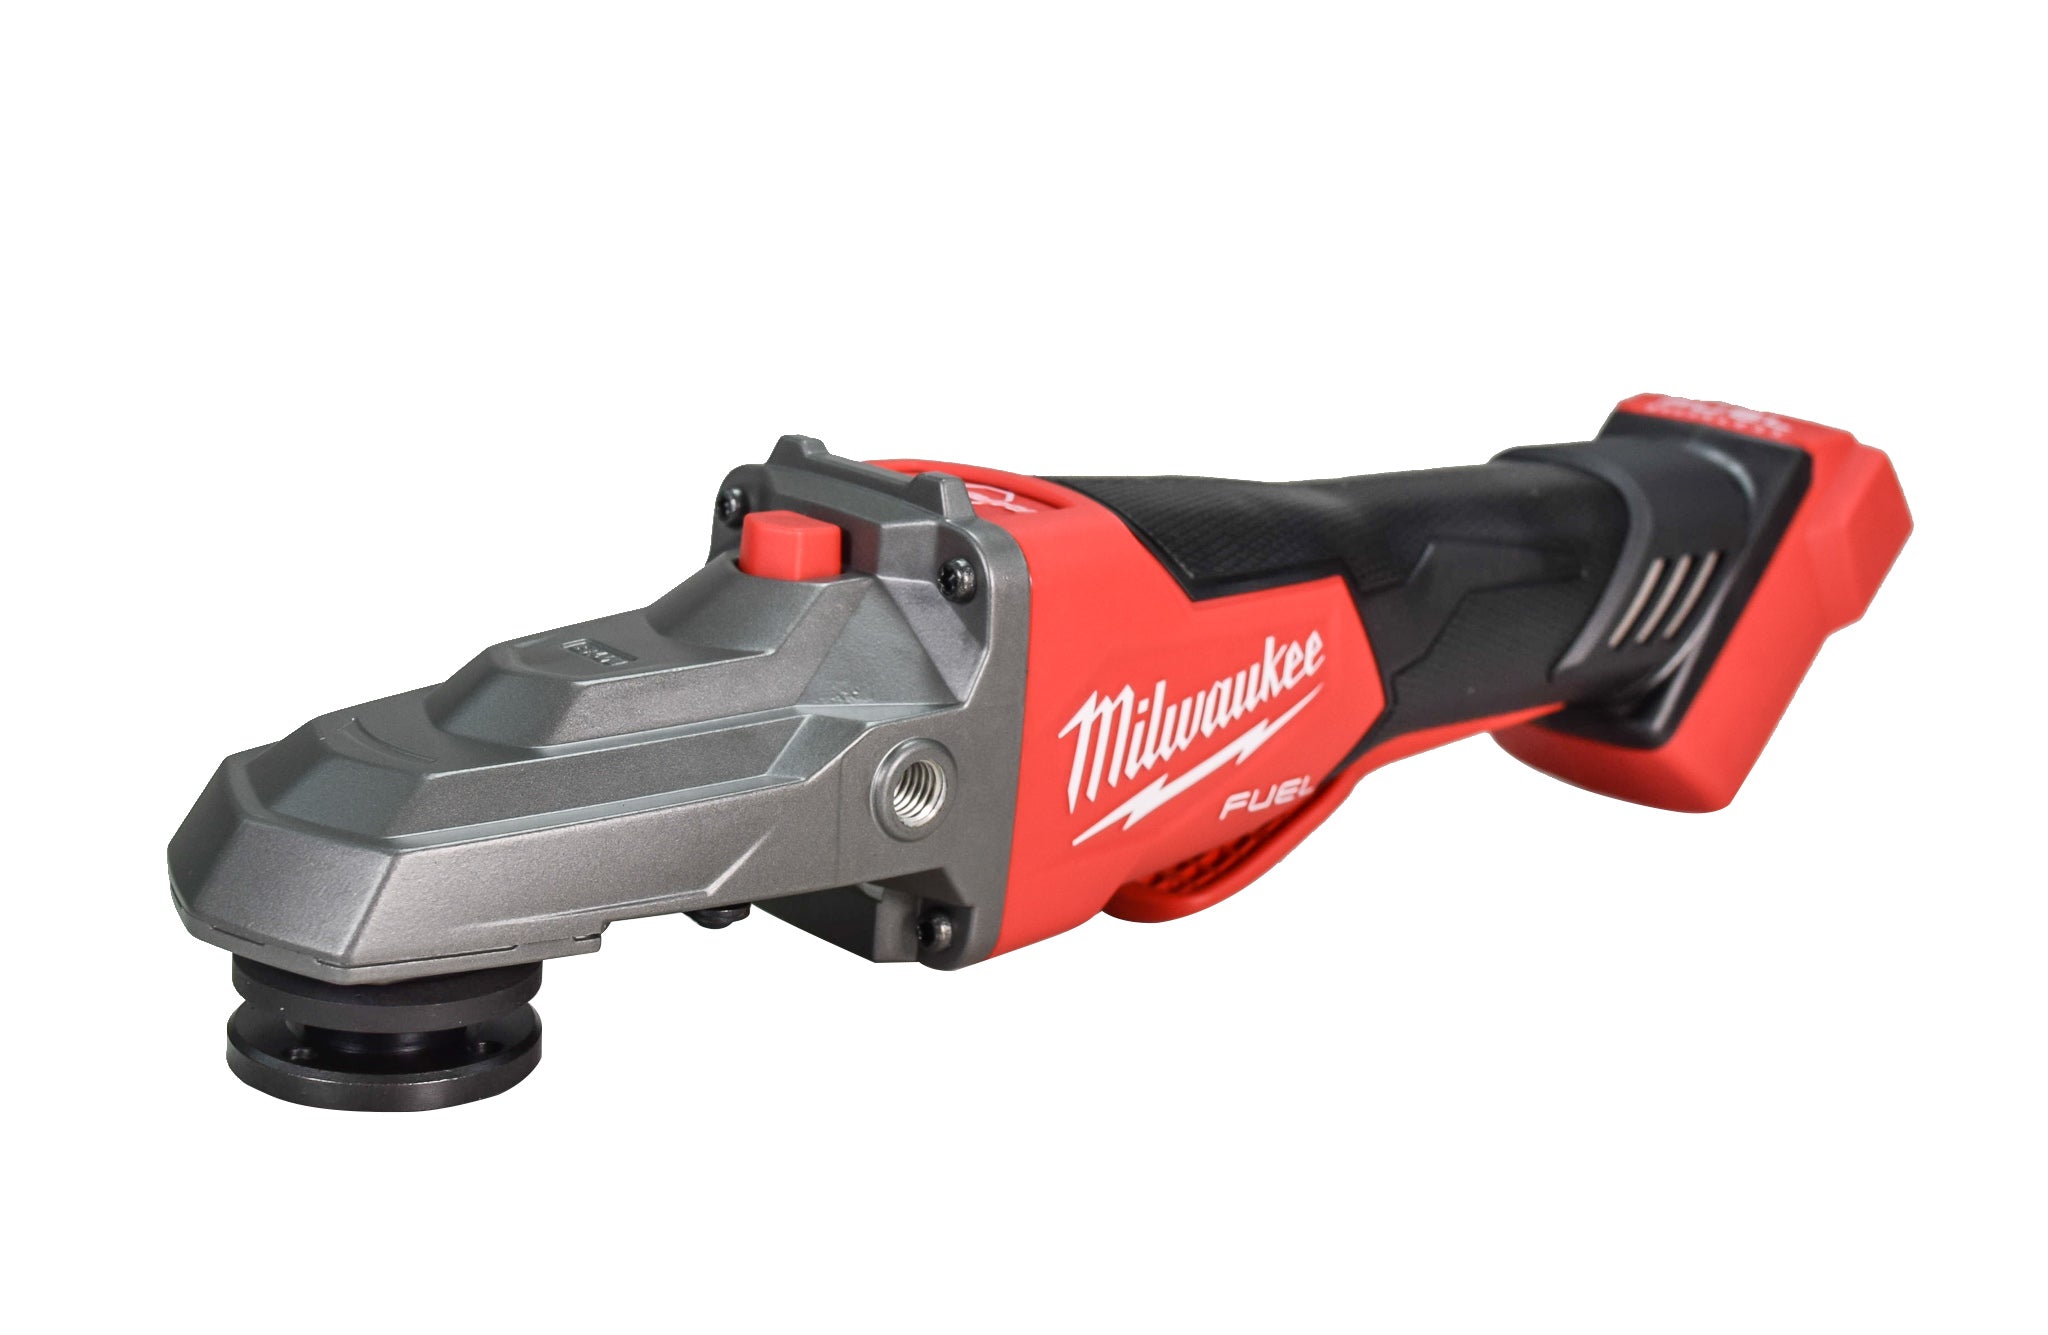 Milwaukee 2886-20 18V Fuel 5"  Cordless Grinder with Paddle Switch No-Lock